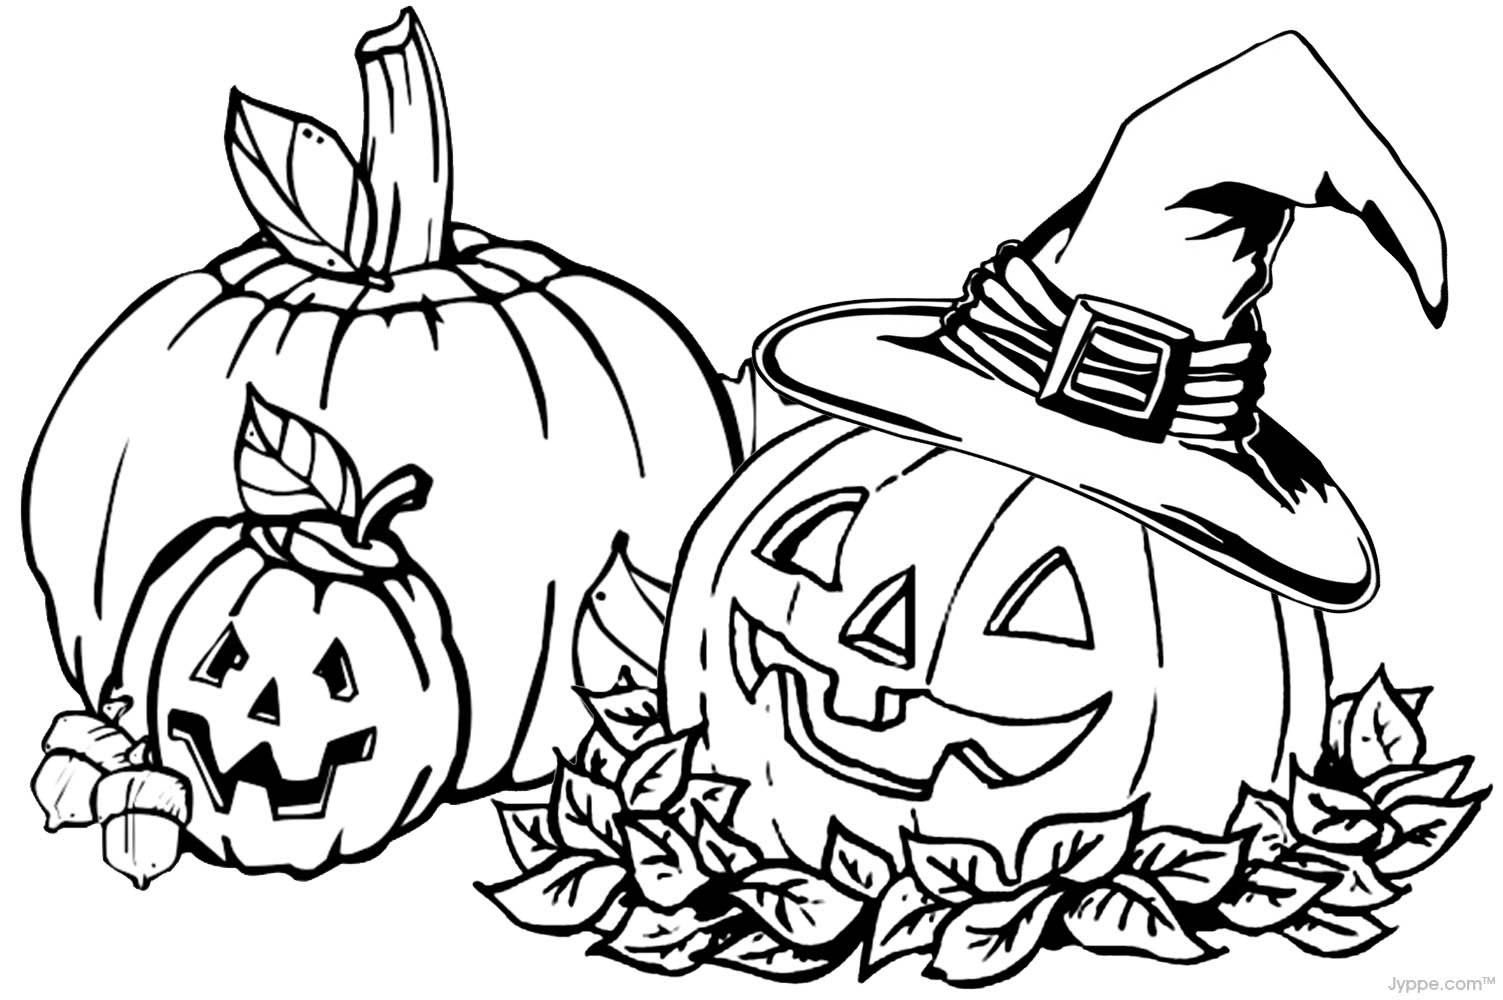 Fall Halloween Pumpkin Coloring Pages for Kids - Print Color Craft